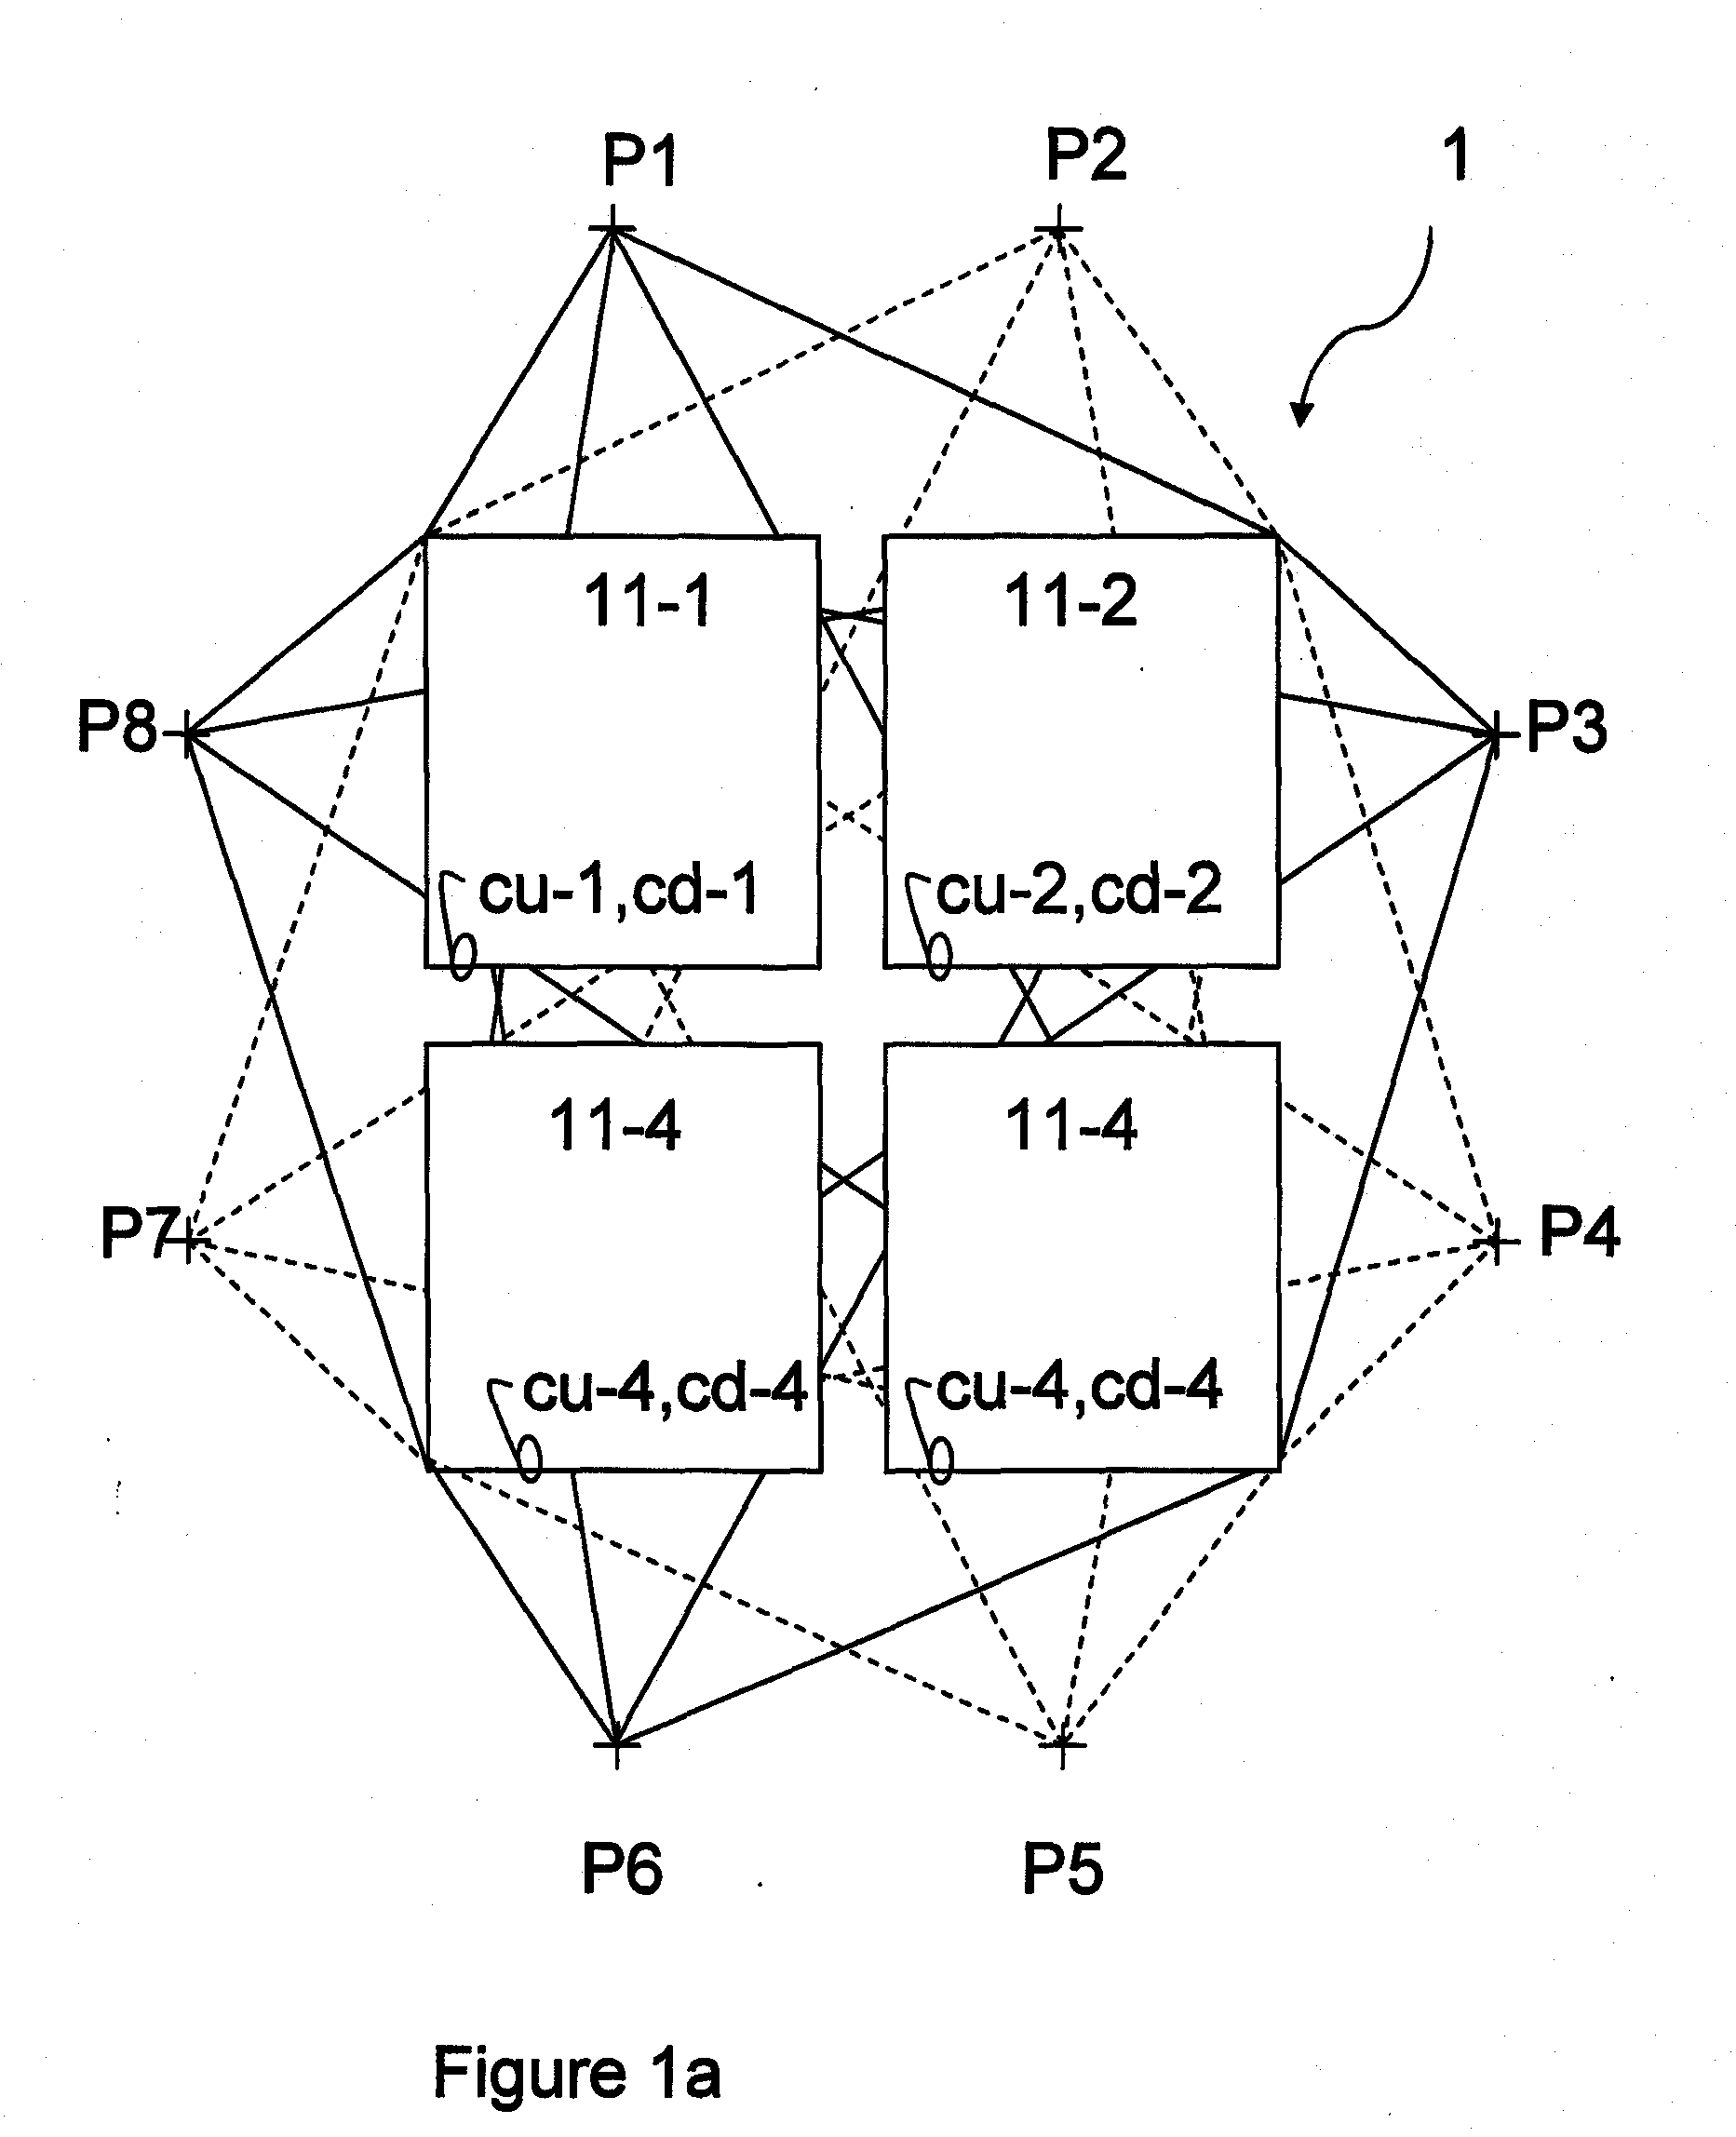 Antenna array, network planning system, communication network and method for relaying radio signals with independently configurable beam pattern shapes using a local knowledge